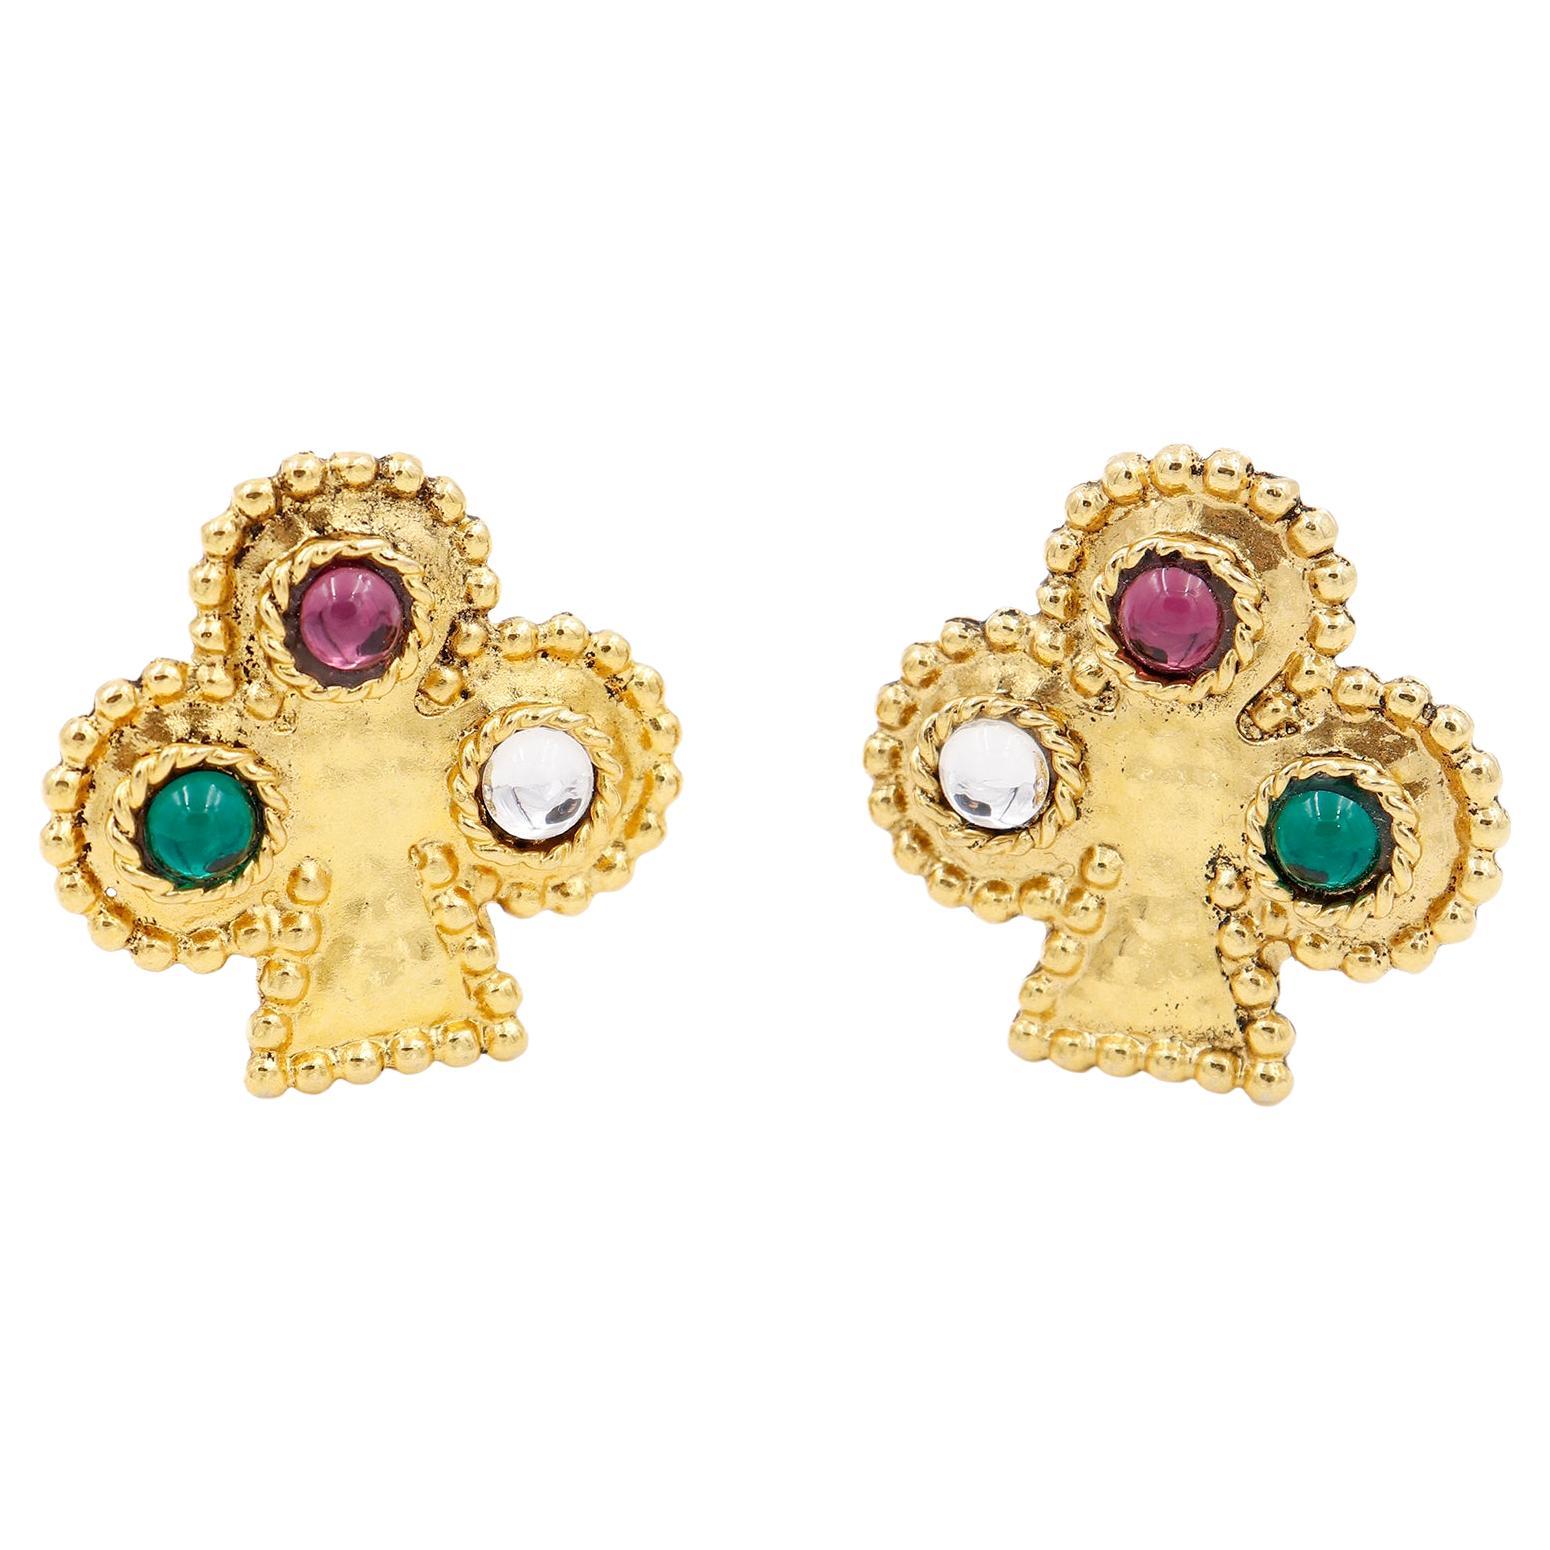 Edouard Rambaud Vintage Hammered Gold Clubs Earrings w Colorful Stones